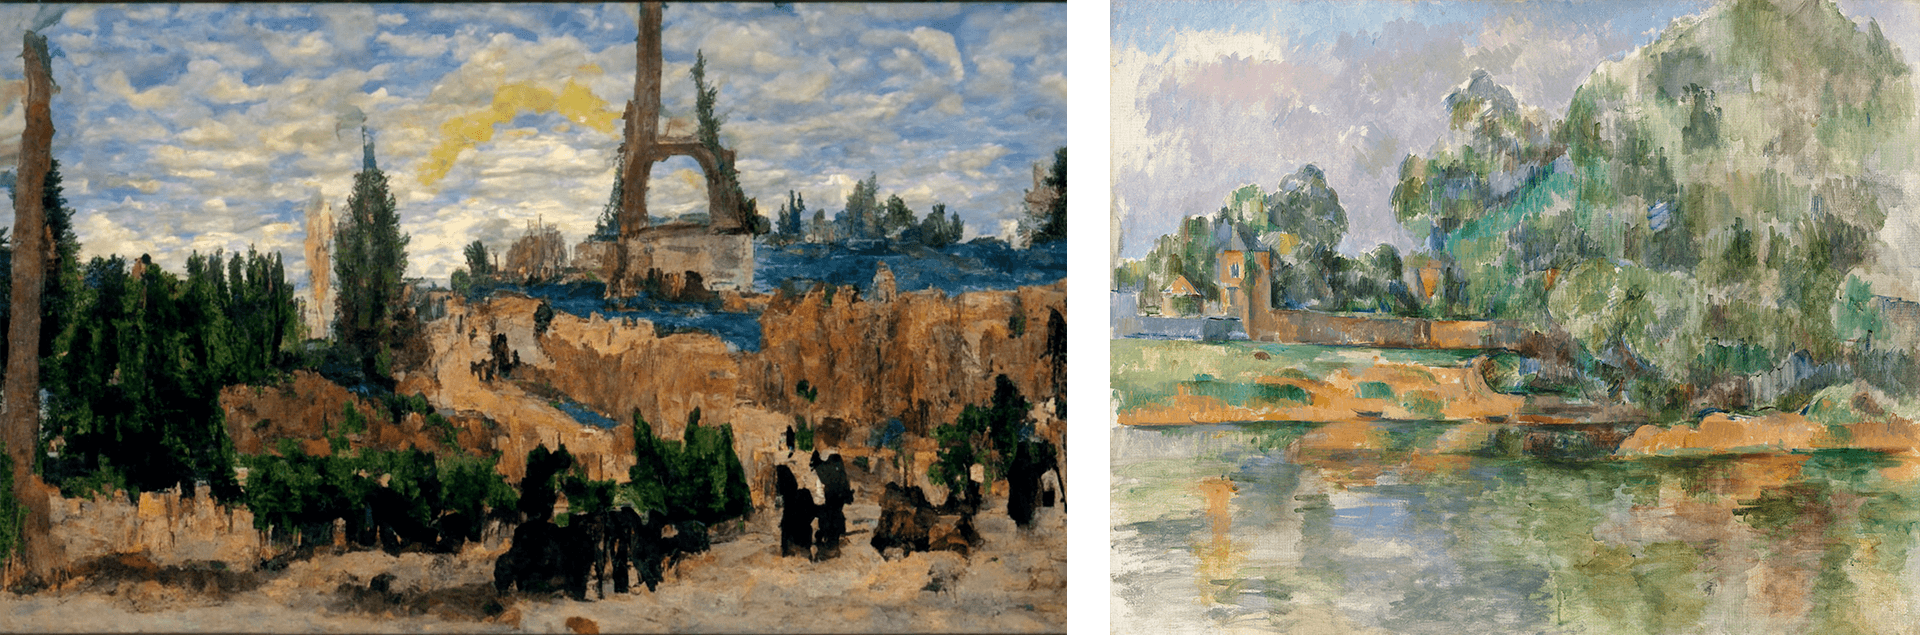 A side-by-side of two post-impressionist landscapes of France shows the difficulty in differentiating human art from AI art. A Paris landscape was created by an AI, while Paul Cezanne's Banks of the Seine at Medan was manmade.